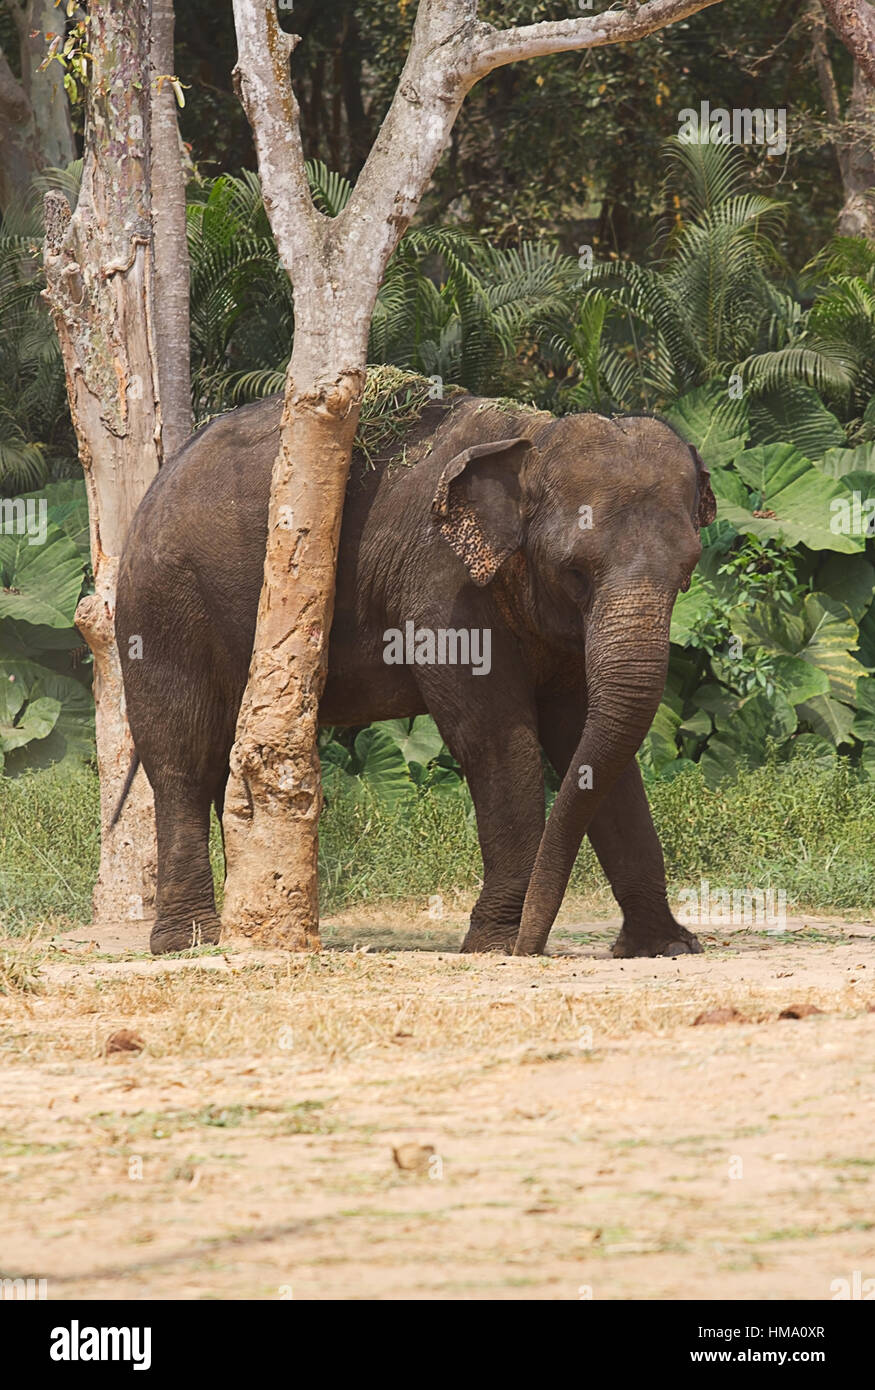 photograph of an Asian elephant rubbing up against a tree Stock Photo